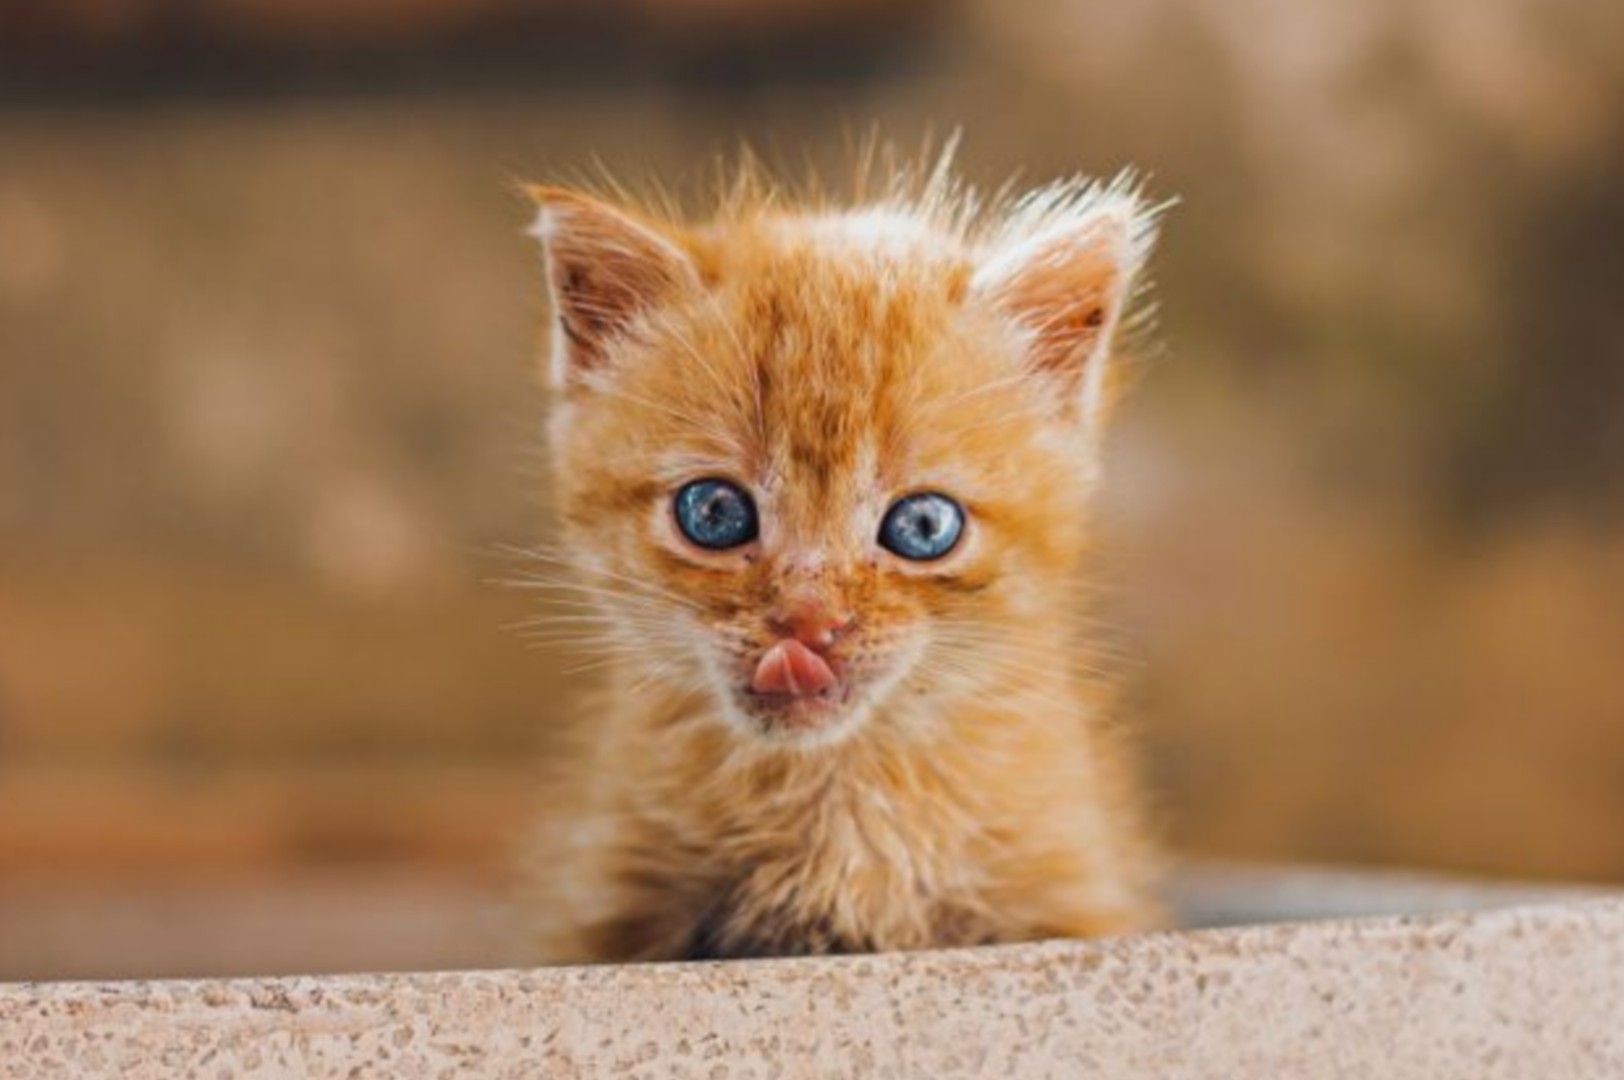 Hair loss in cats, its causes, and some treatments for